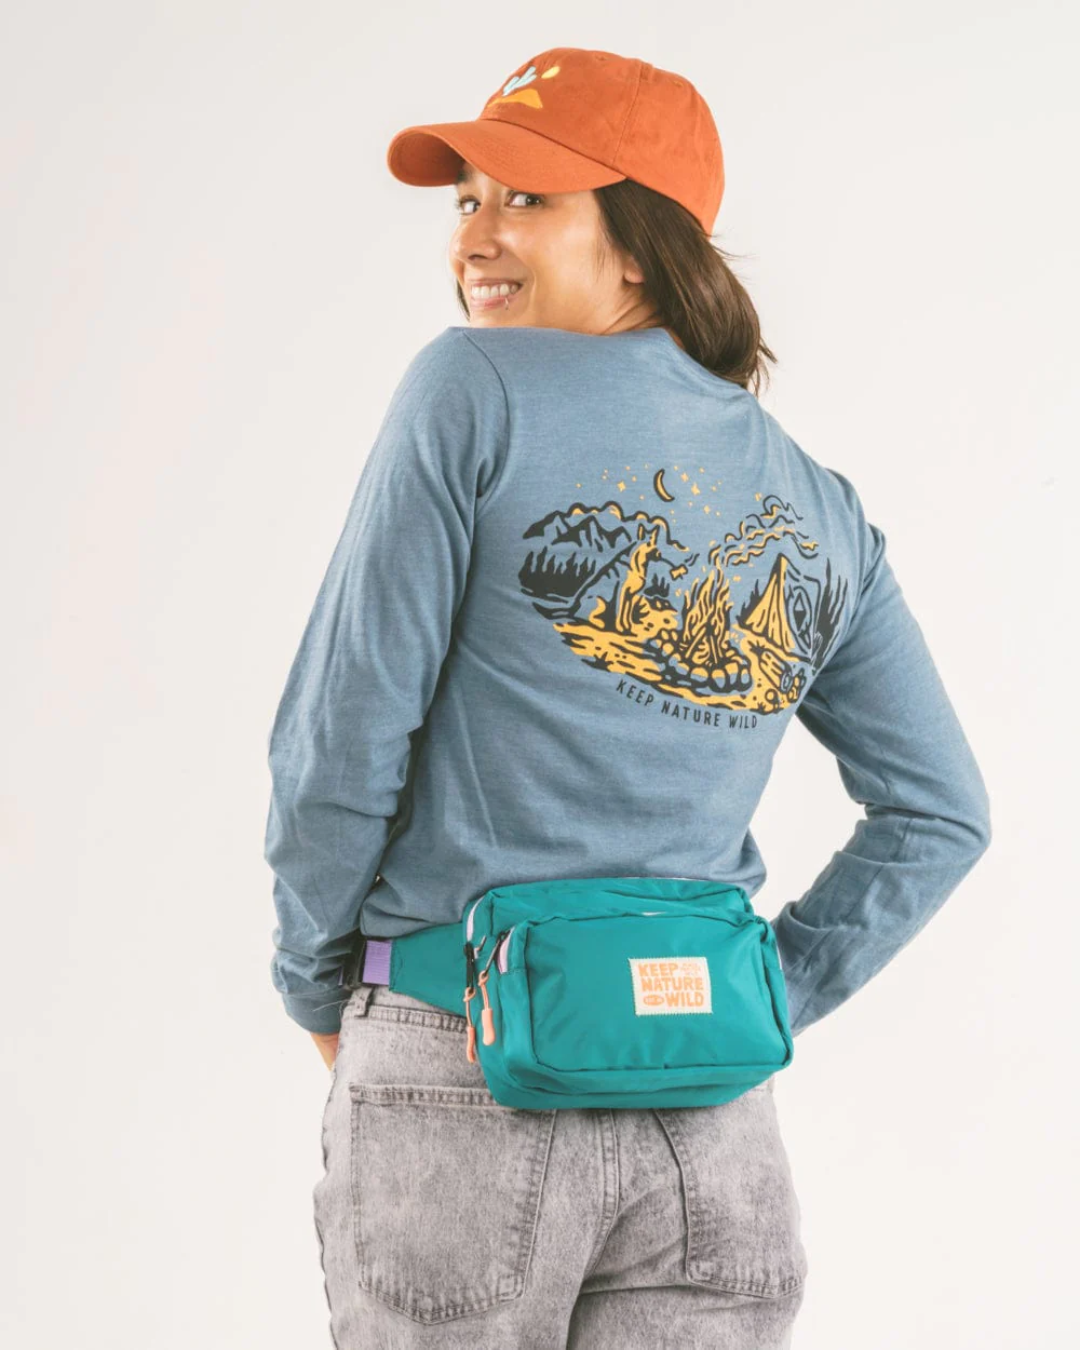 Teal/Lavender Adventure Fanny Pack - Keep Nature Wild